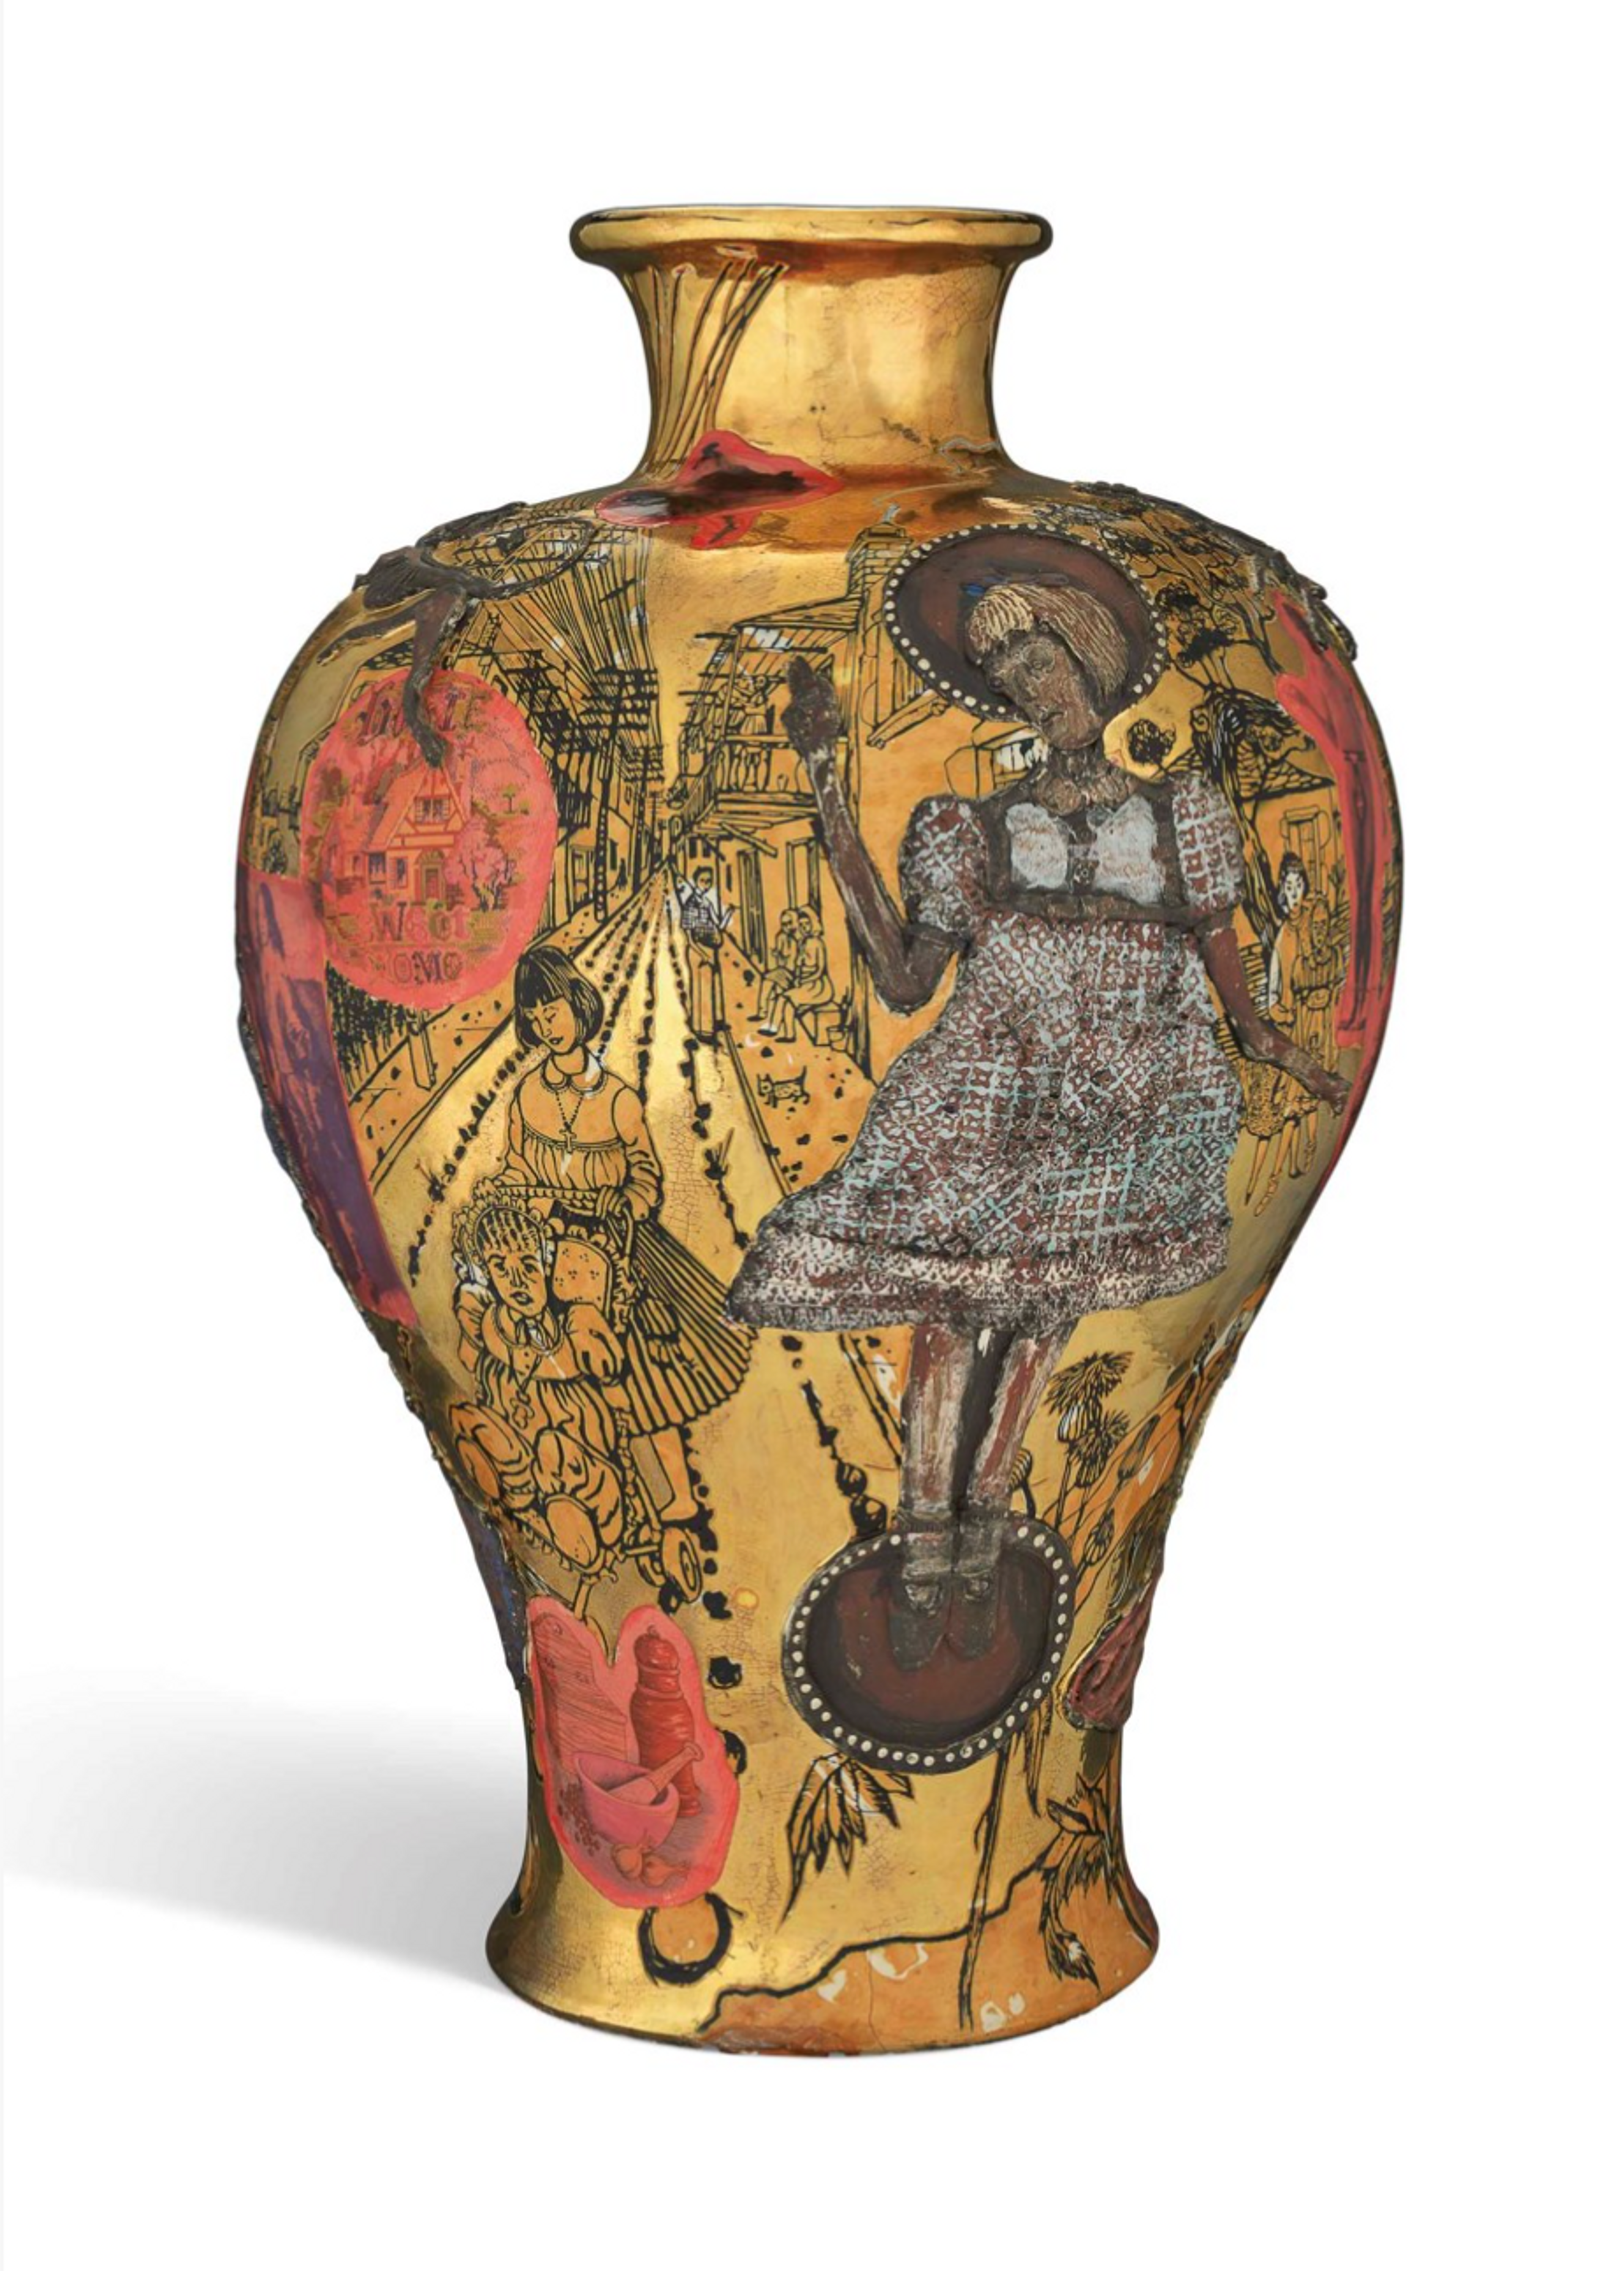 Saint Claire 37 Wanks Across Northern Spain by Grayson Perry